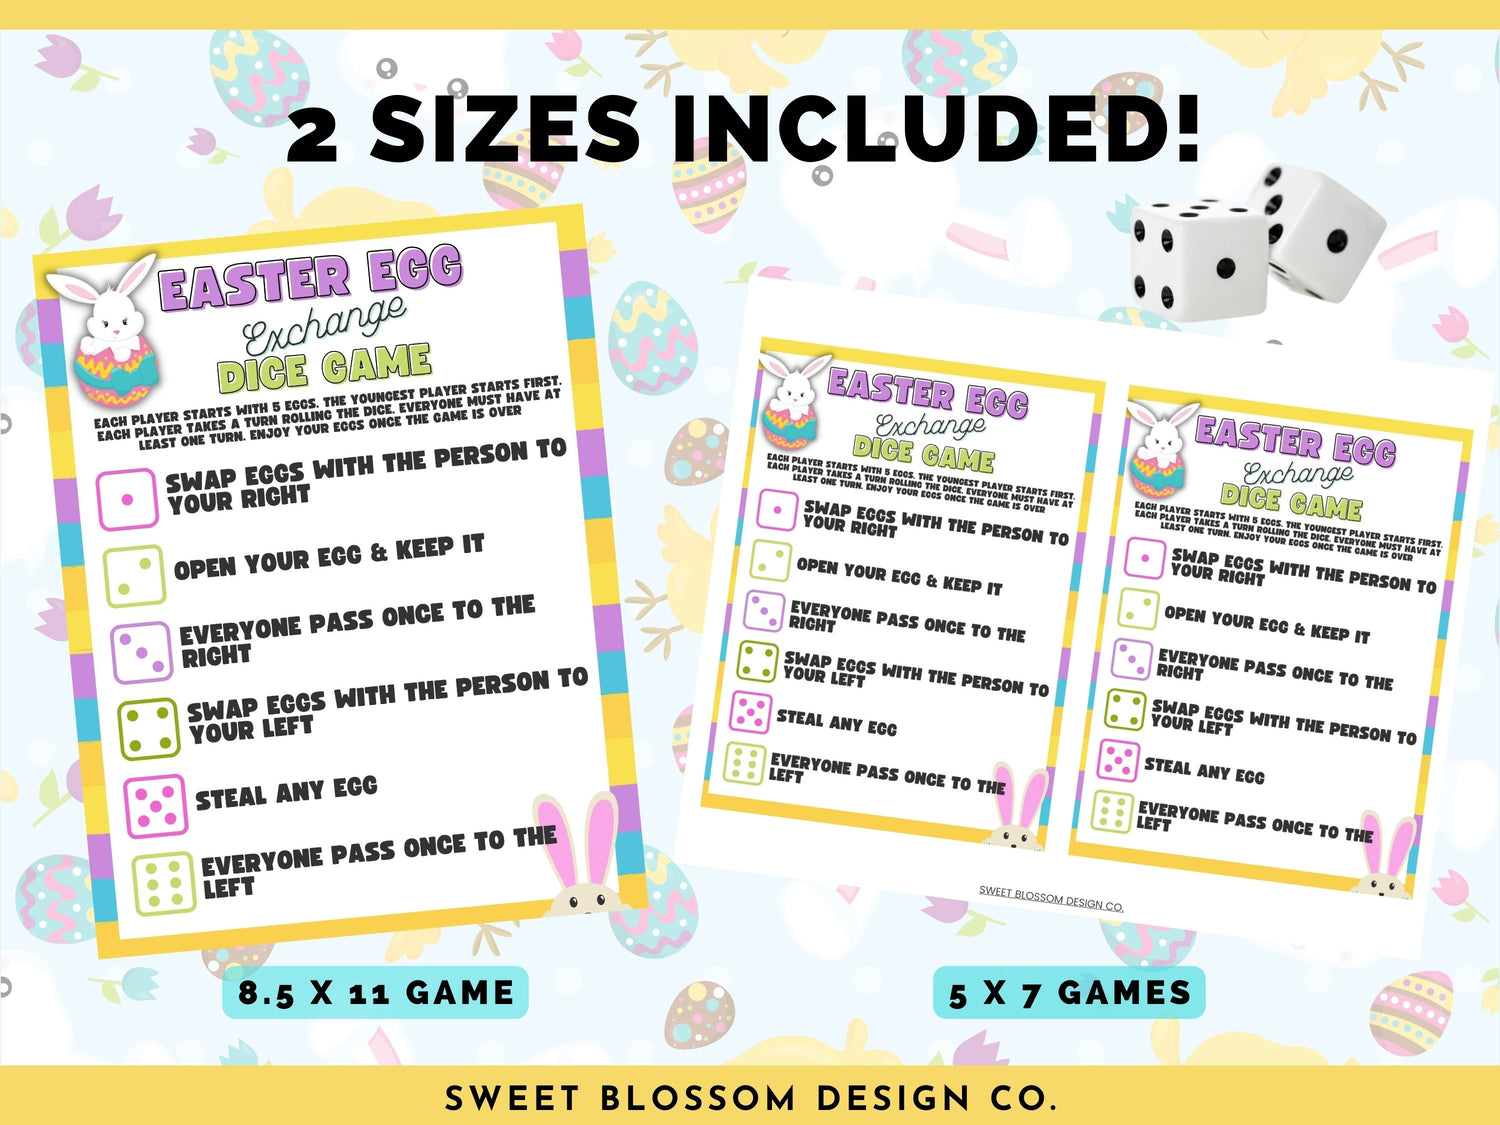 This Easter Egg Exchange Dice is such a fun printable Easter and Spring game to play with friends and loved ones! This printable Easter game for kids will bring hours of fun and entertainment. This is a fun Easter Activity for Adults too! 